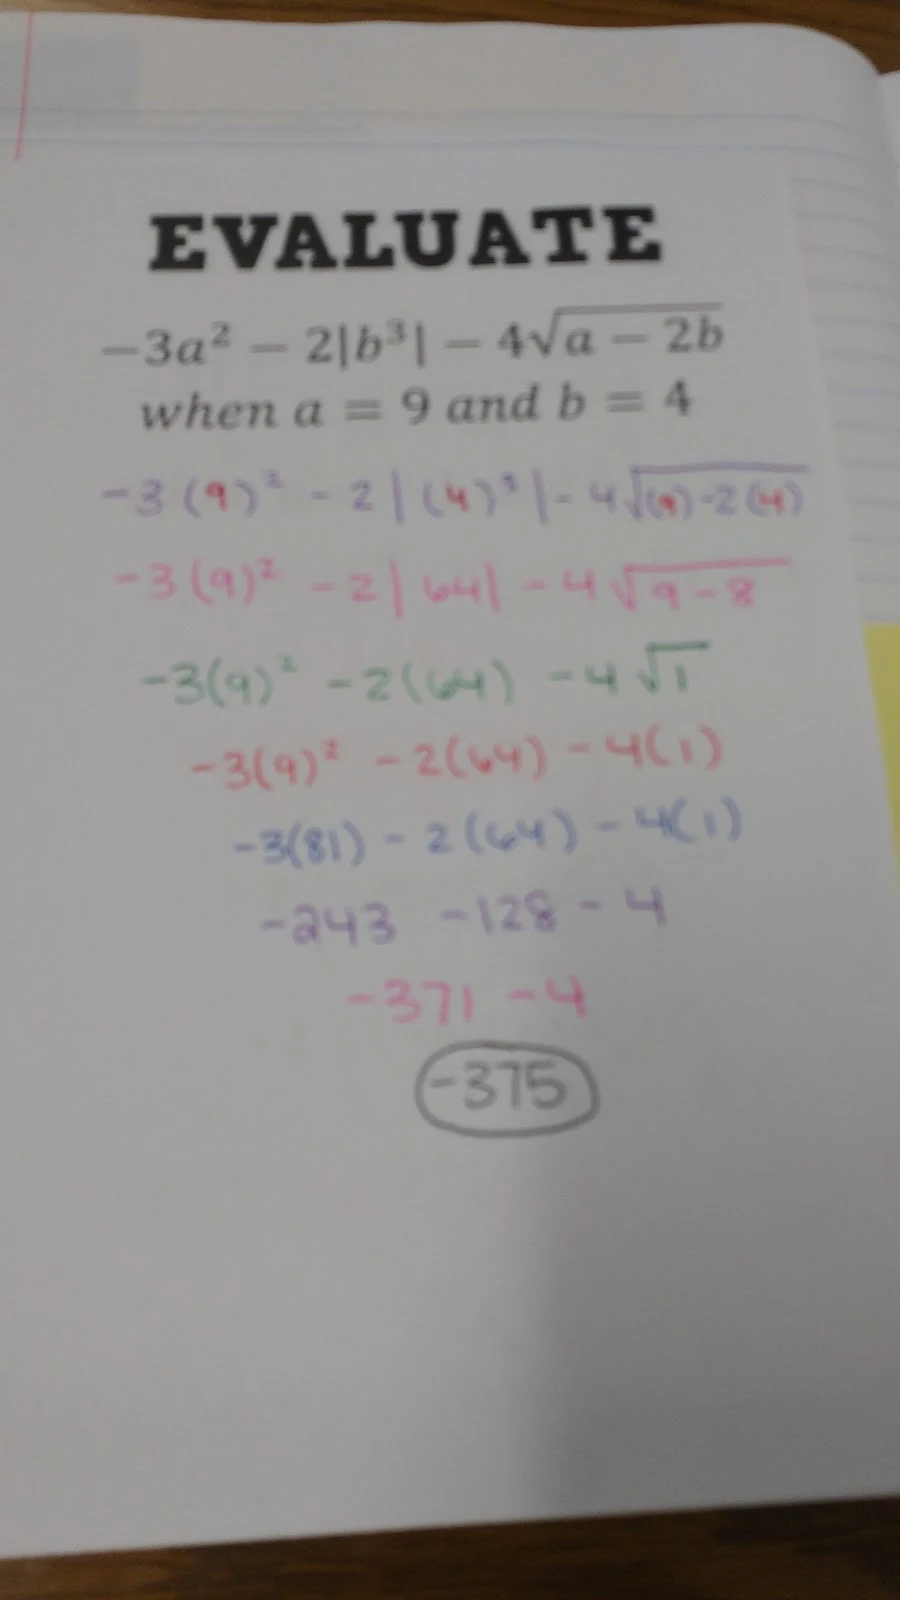 evaluating expressions practice problems with pocket